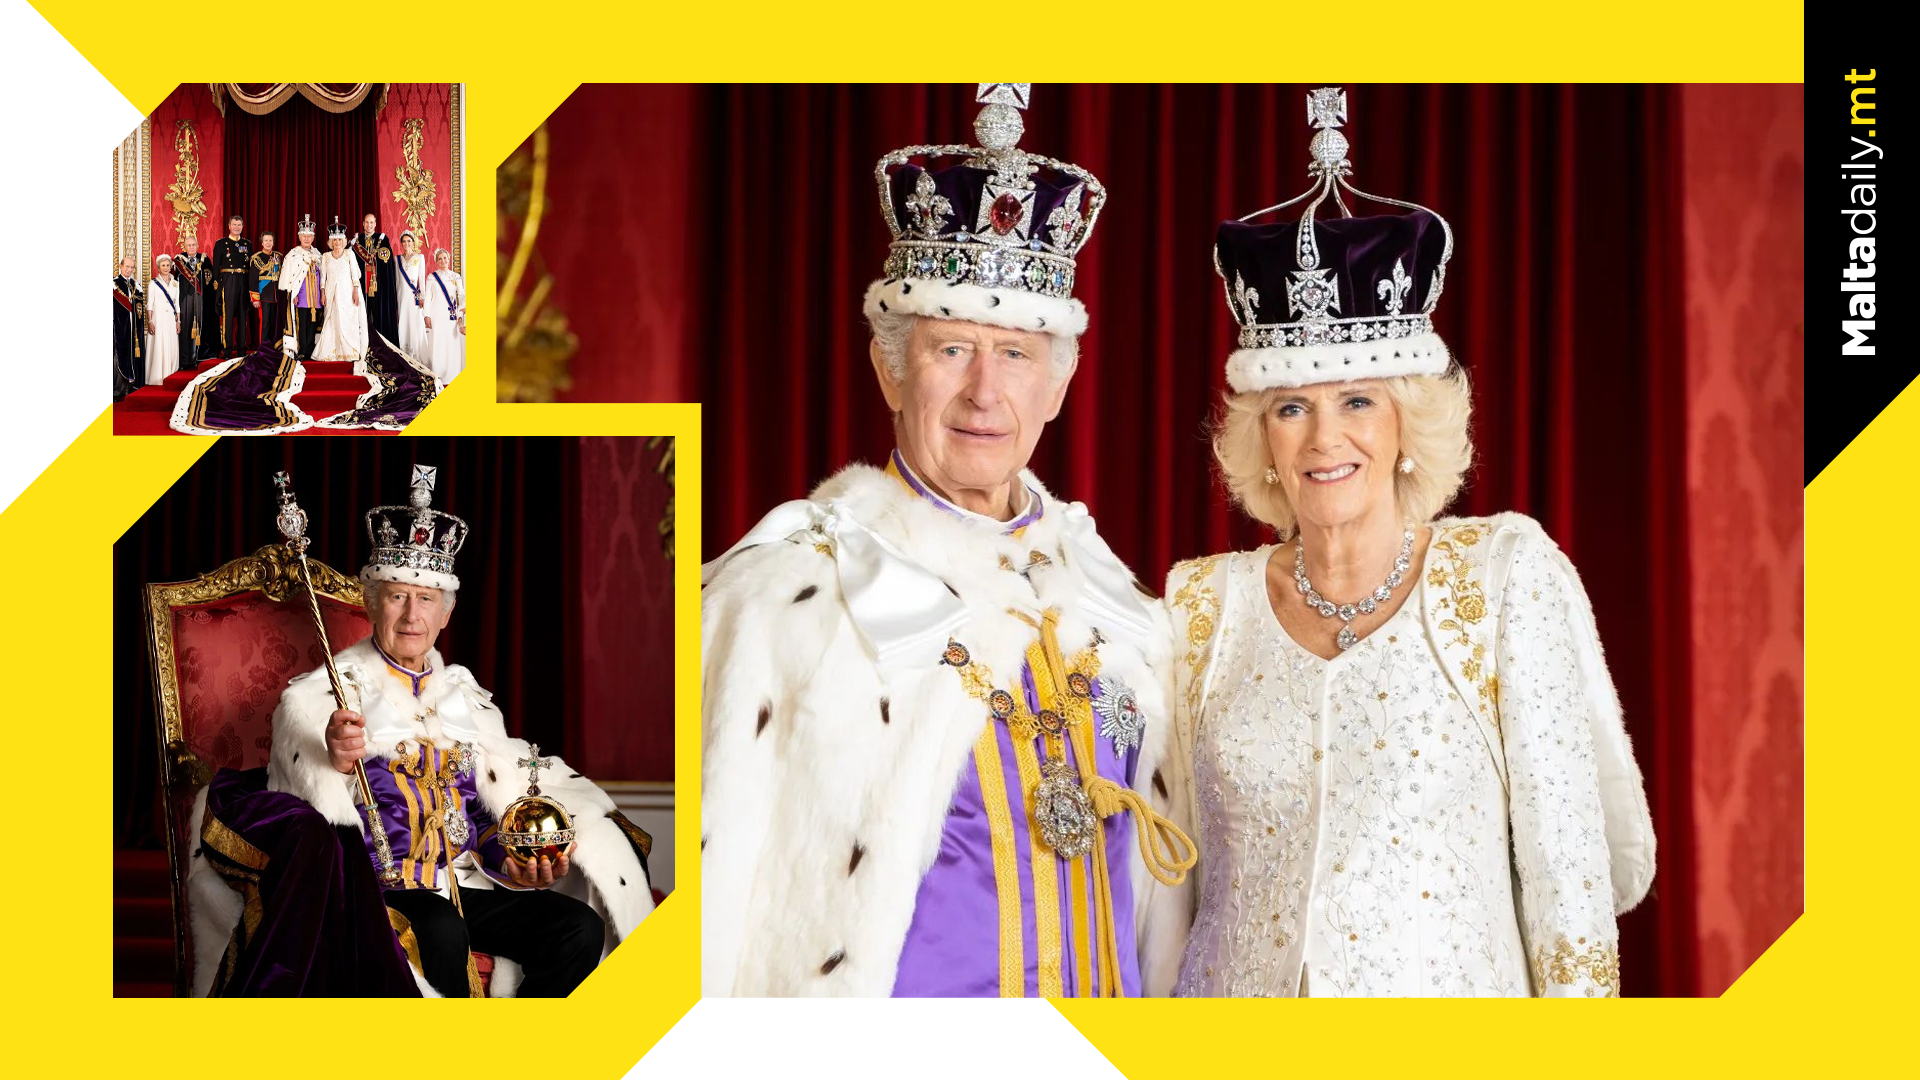 King and queen share 'heartfelt thanks' as official coronation photos  released, King Charles coronation